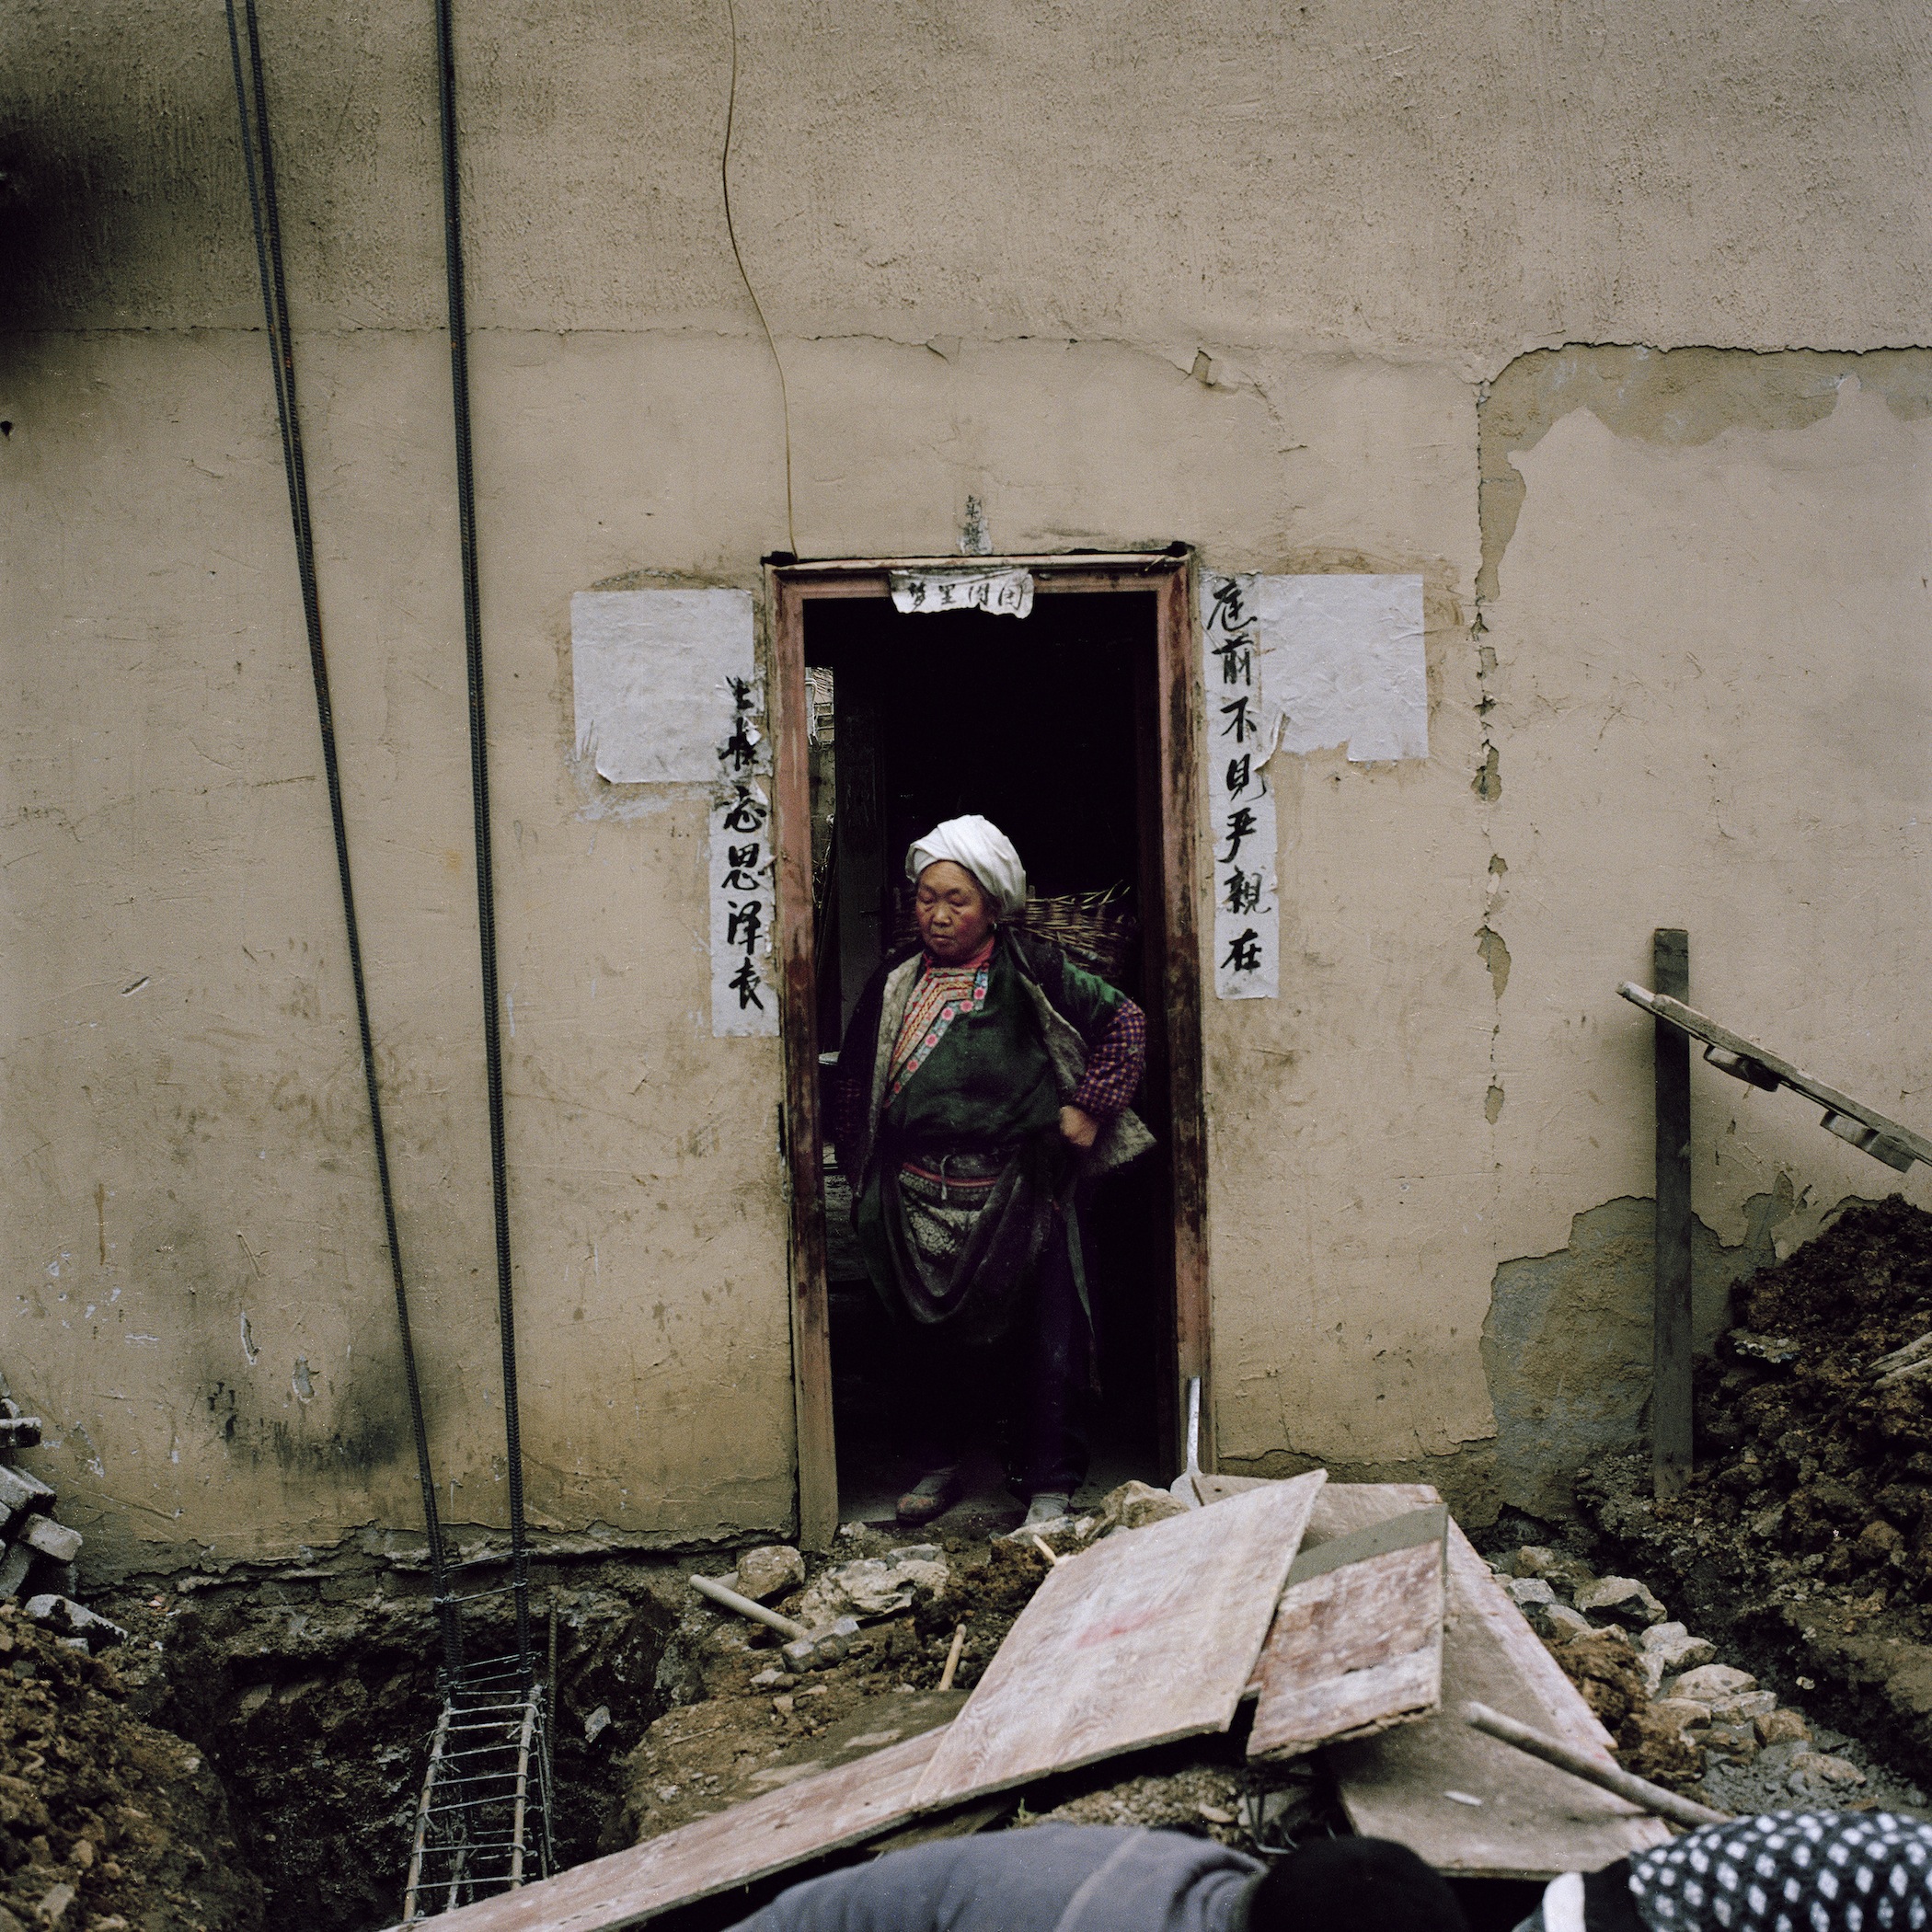 A Widow Expanding her House, Radish Village, Sichuan, China, March 2016